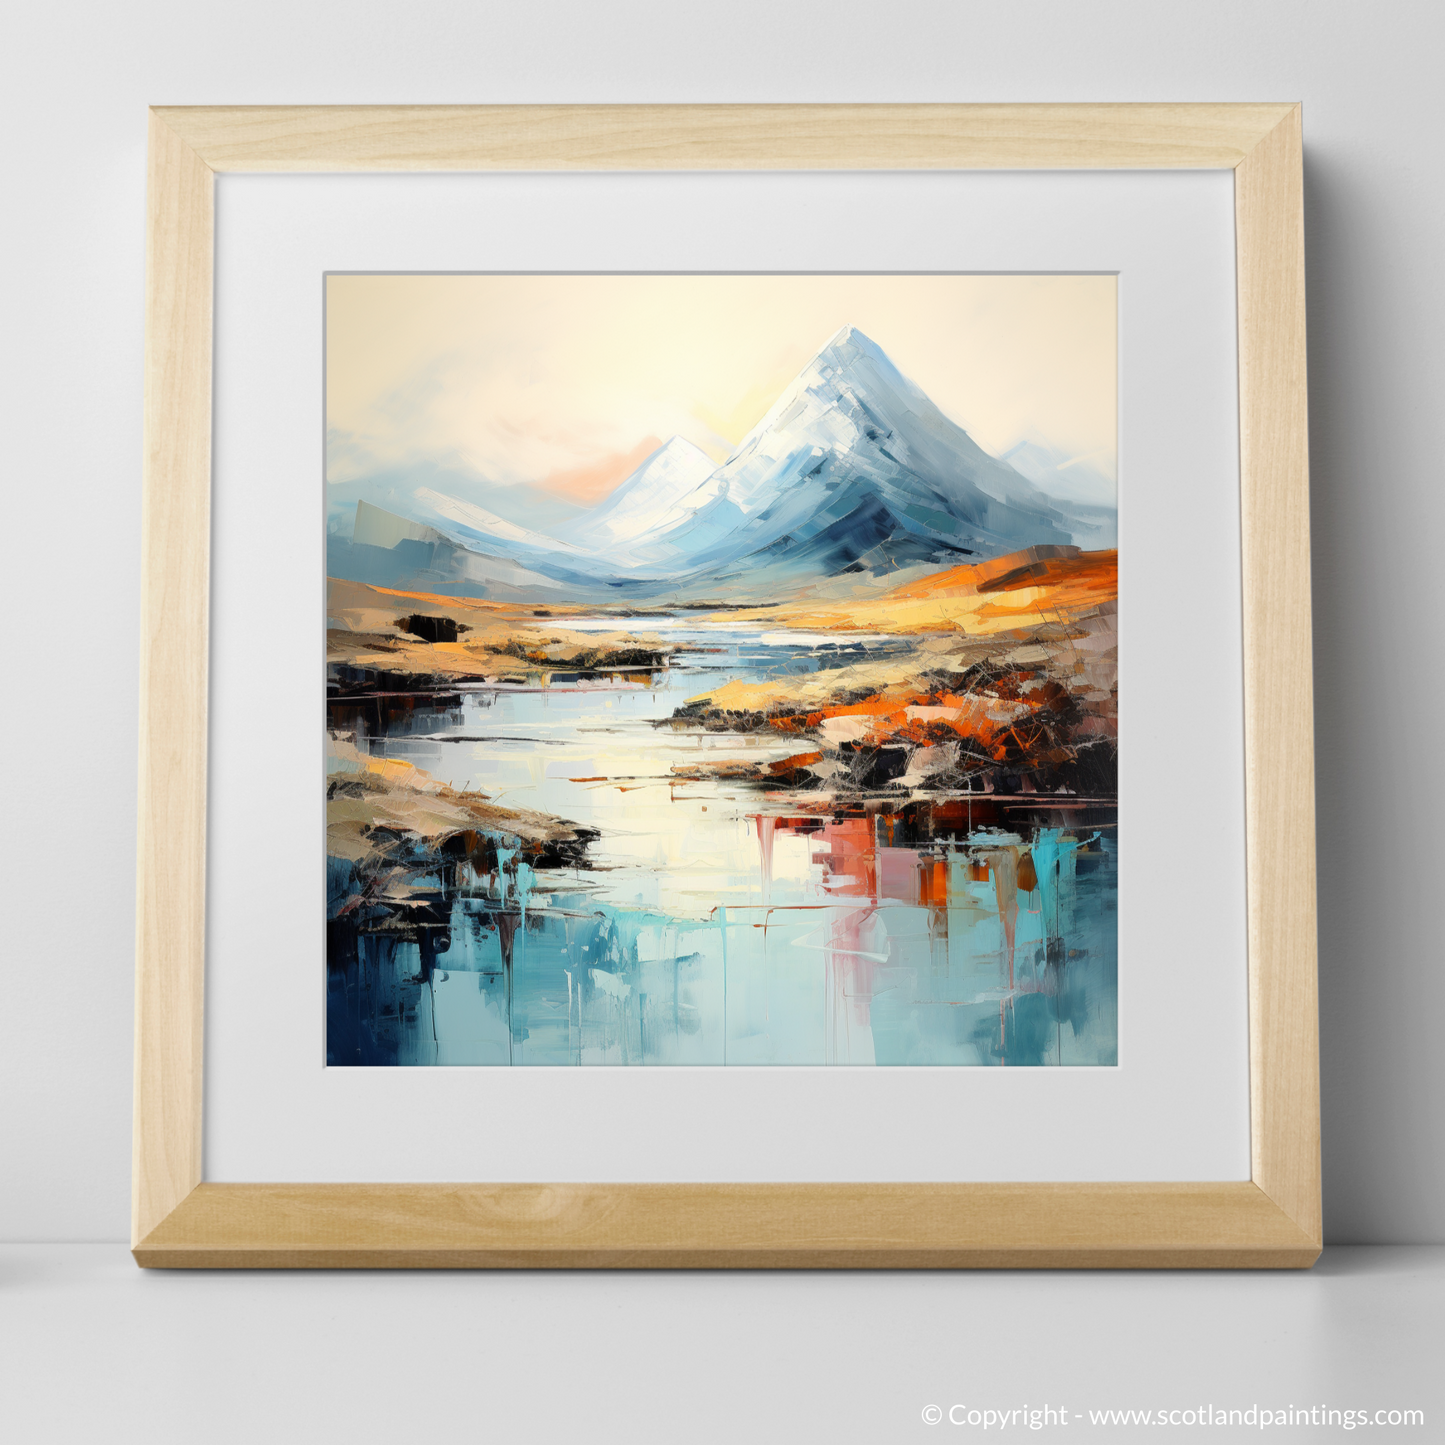 Highland Majesty: An Abstract Tribute to Buachaille Etive Mòr